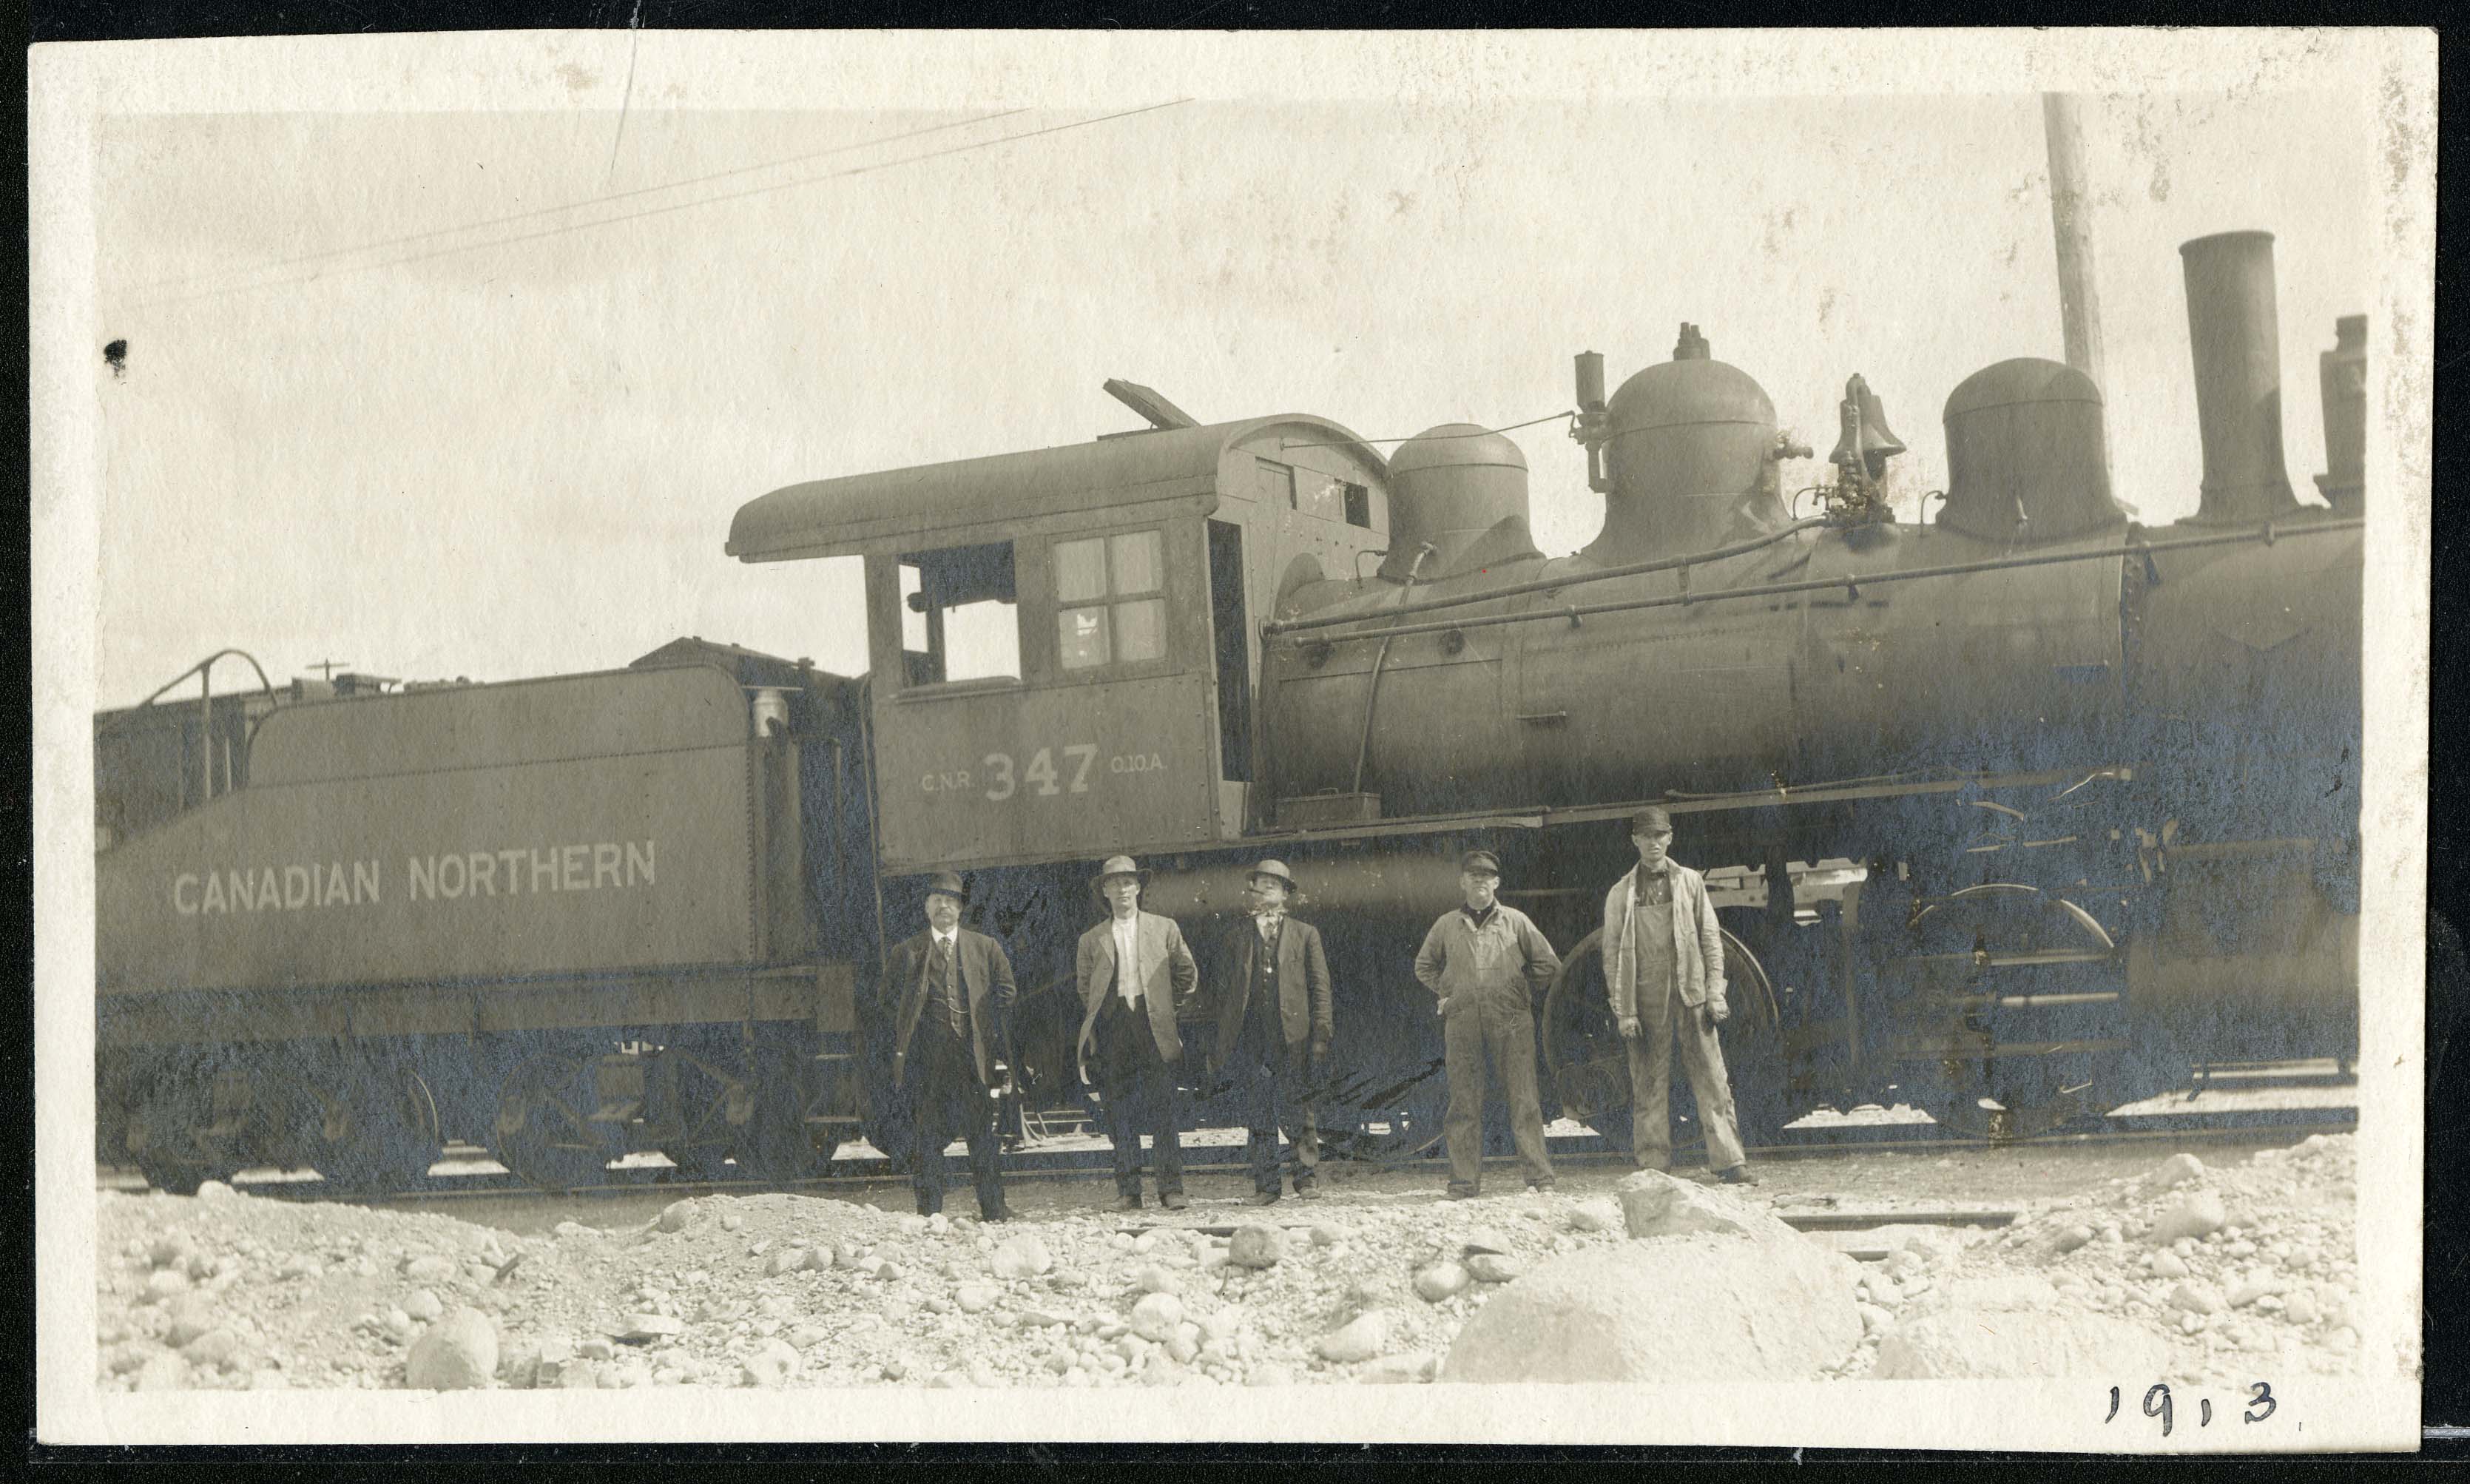 Men in front of train engine in an archival photo.